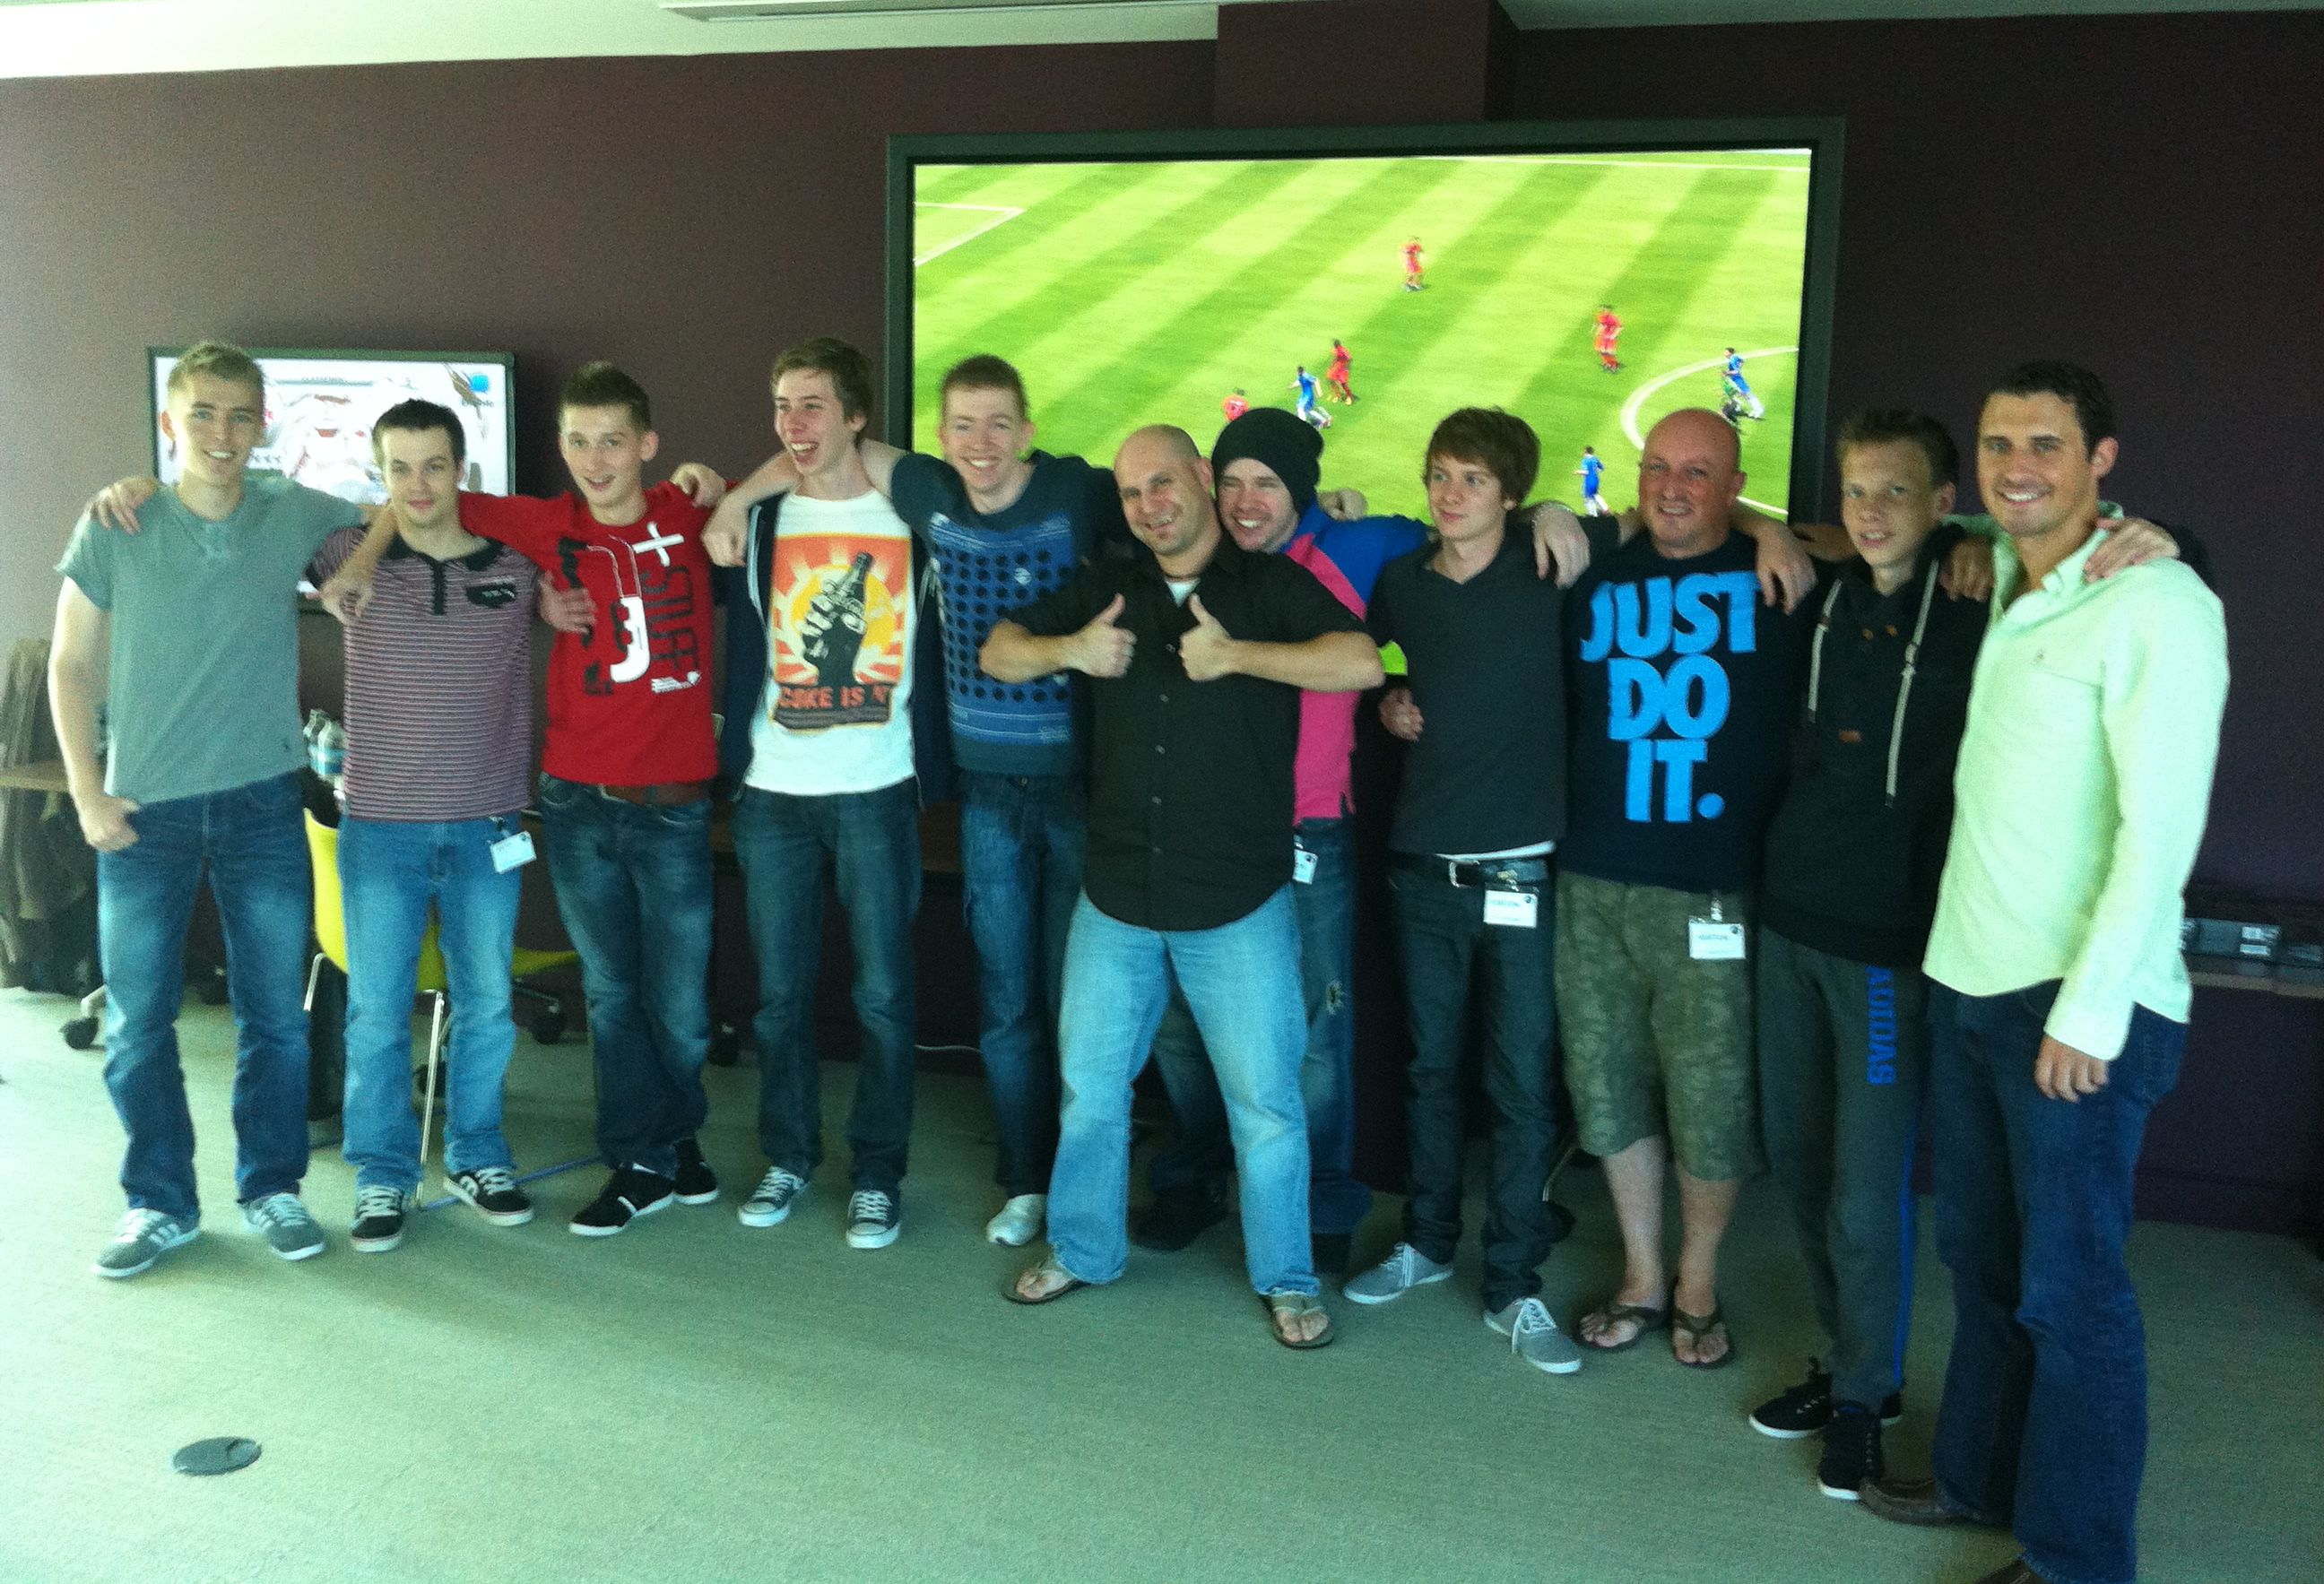 EA SPORTS flew in the world's top 10 FIFA YouTube directors in to their offices at their Guildford studios in the UK. The guys had 3 days in the offices to play FIFA 13 and create great content to help promote the launch of the Demo and the game.